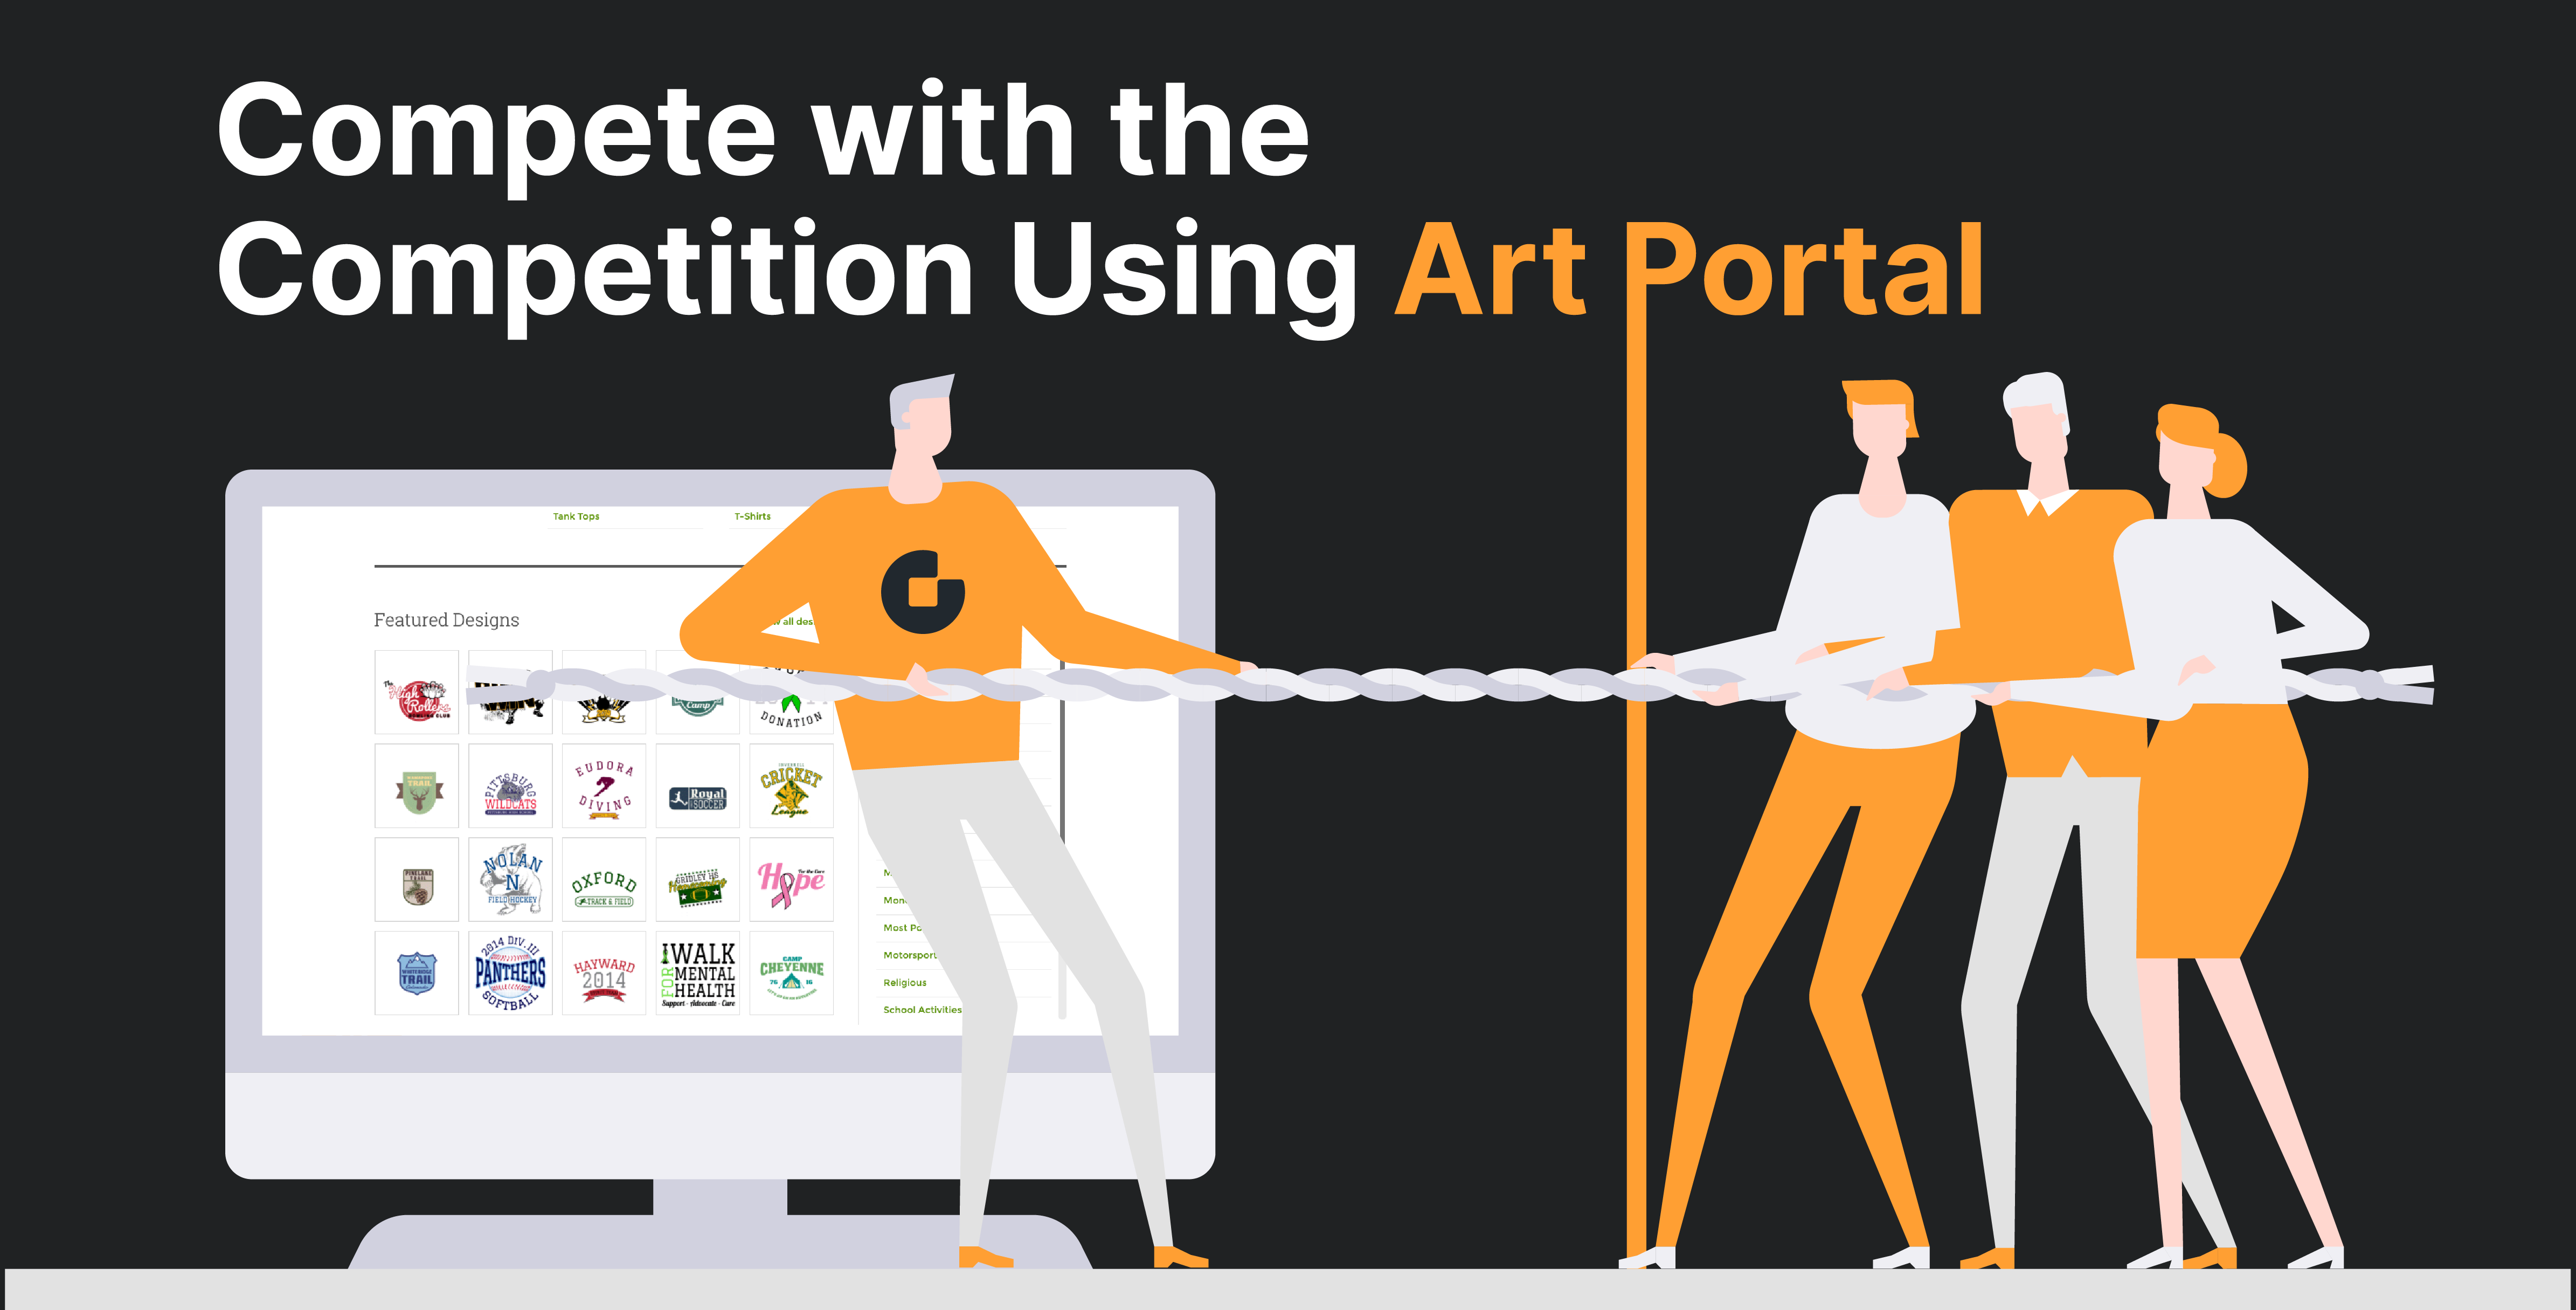 Use Art Portal to Stay Ahead of the Competition